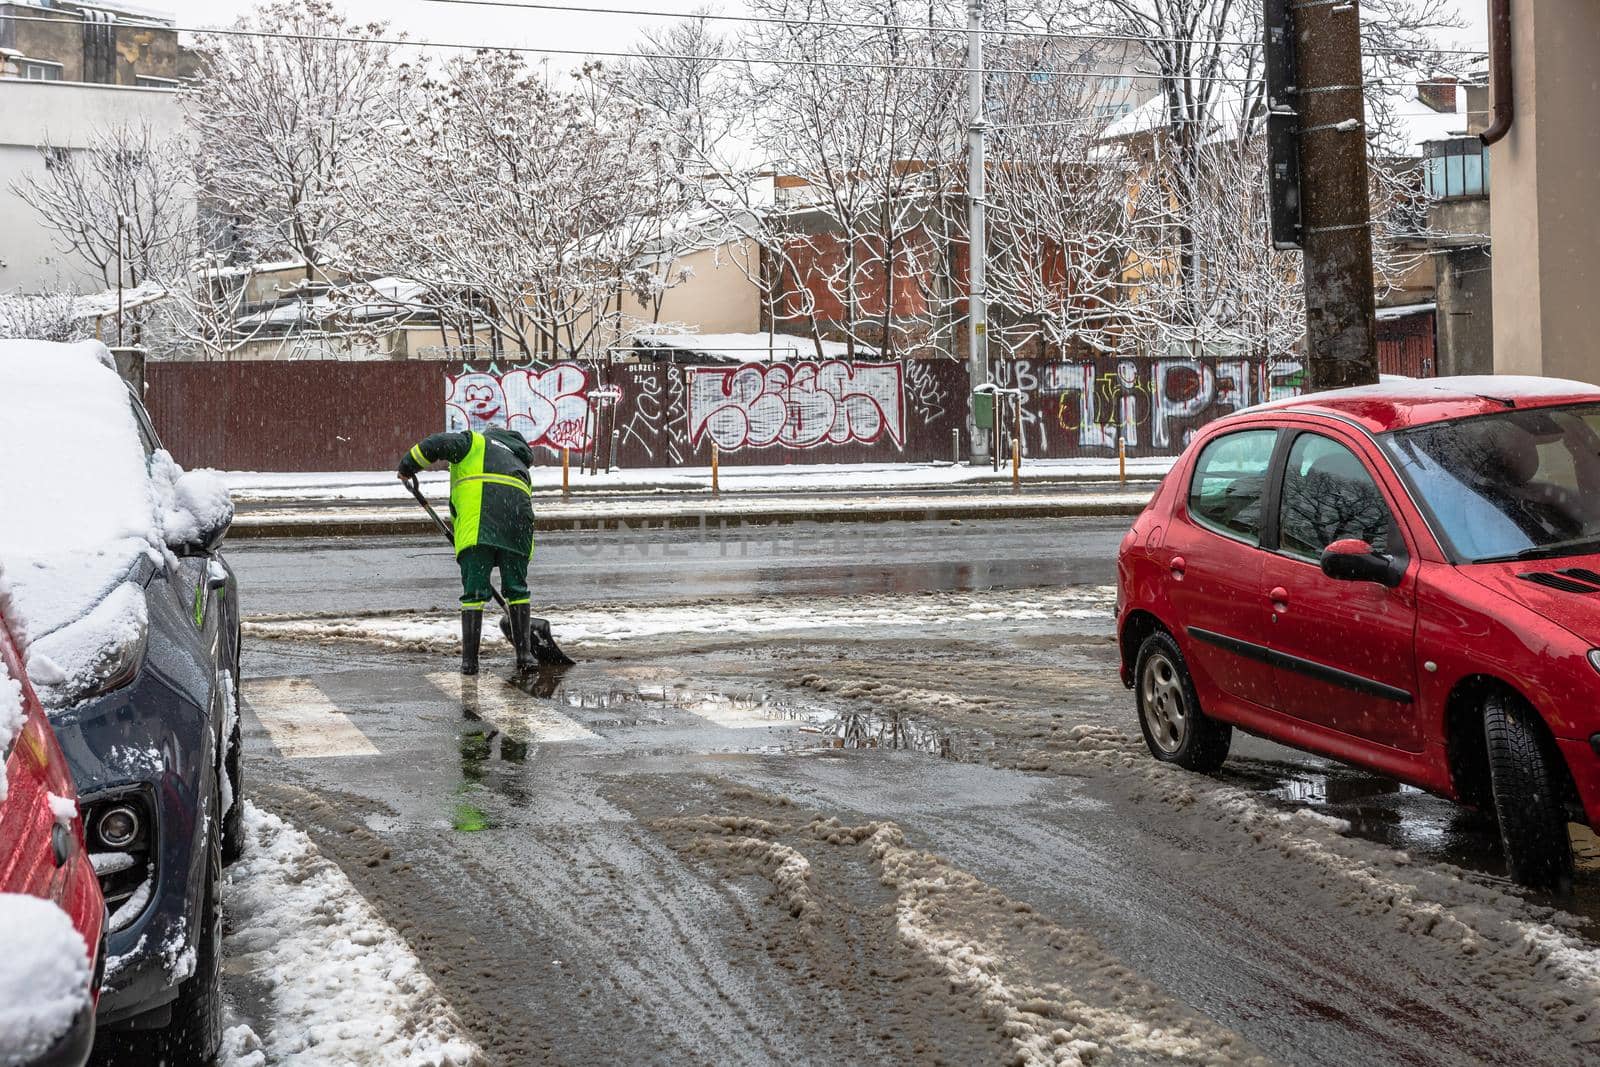 Snow removal, worker cleaning the snowy road in Bucharest, Romania, 2021